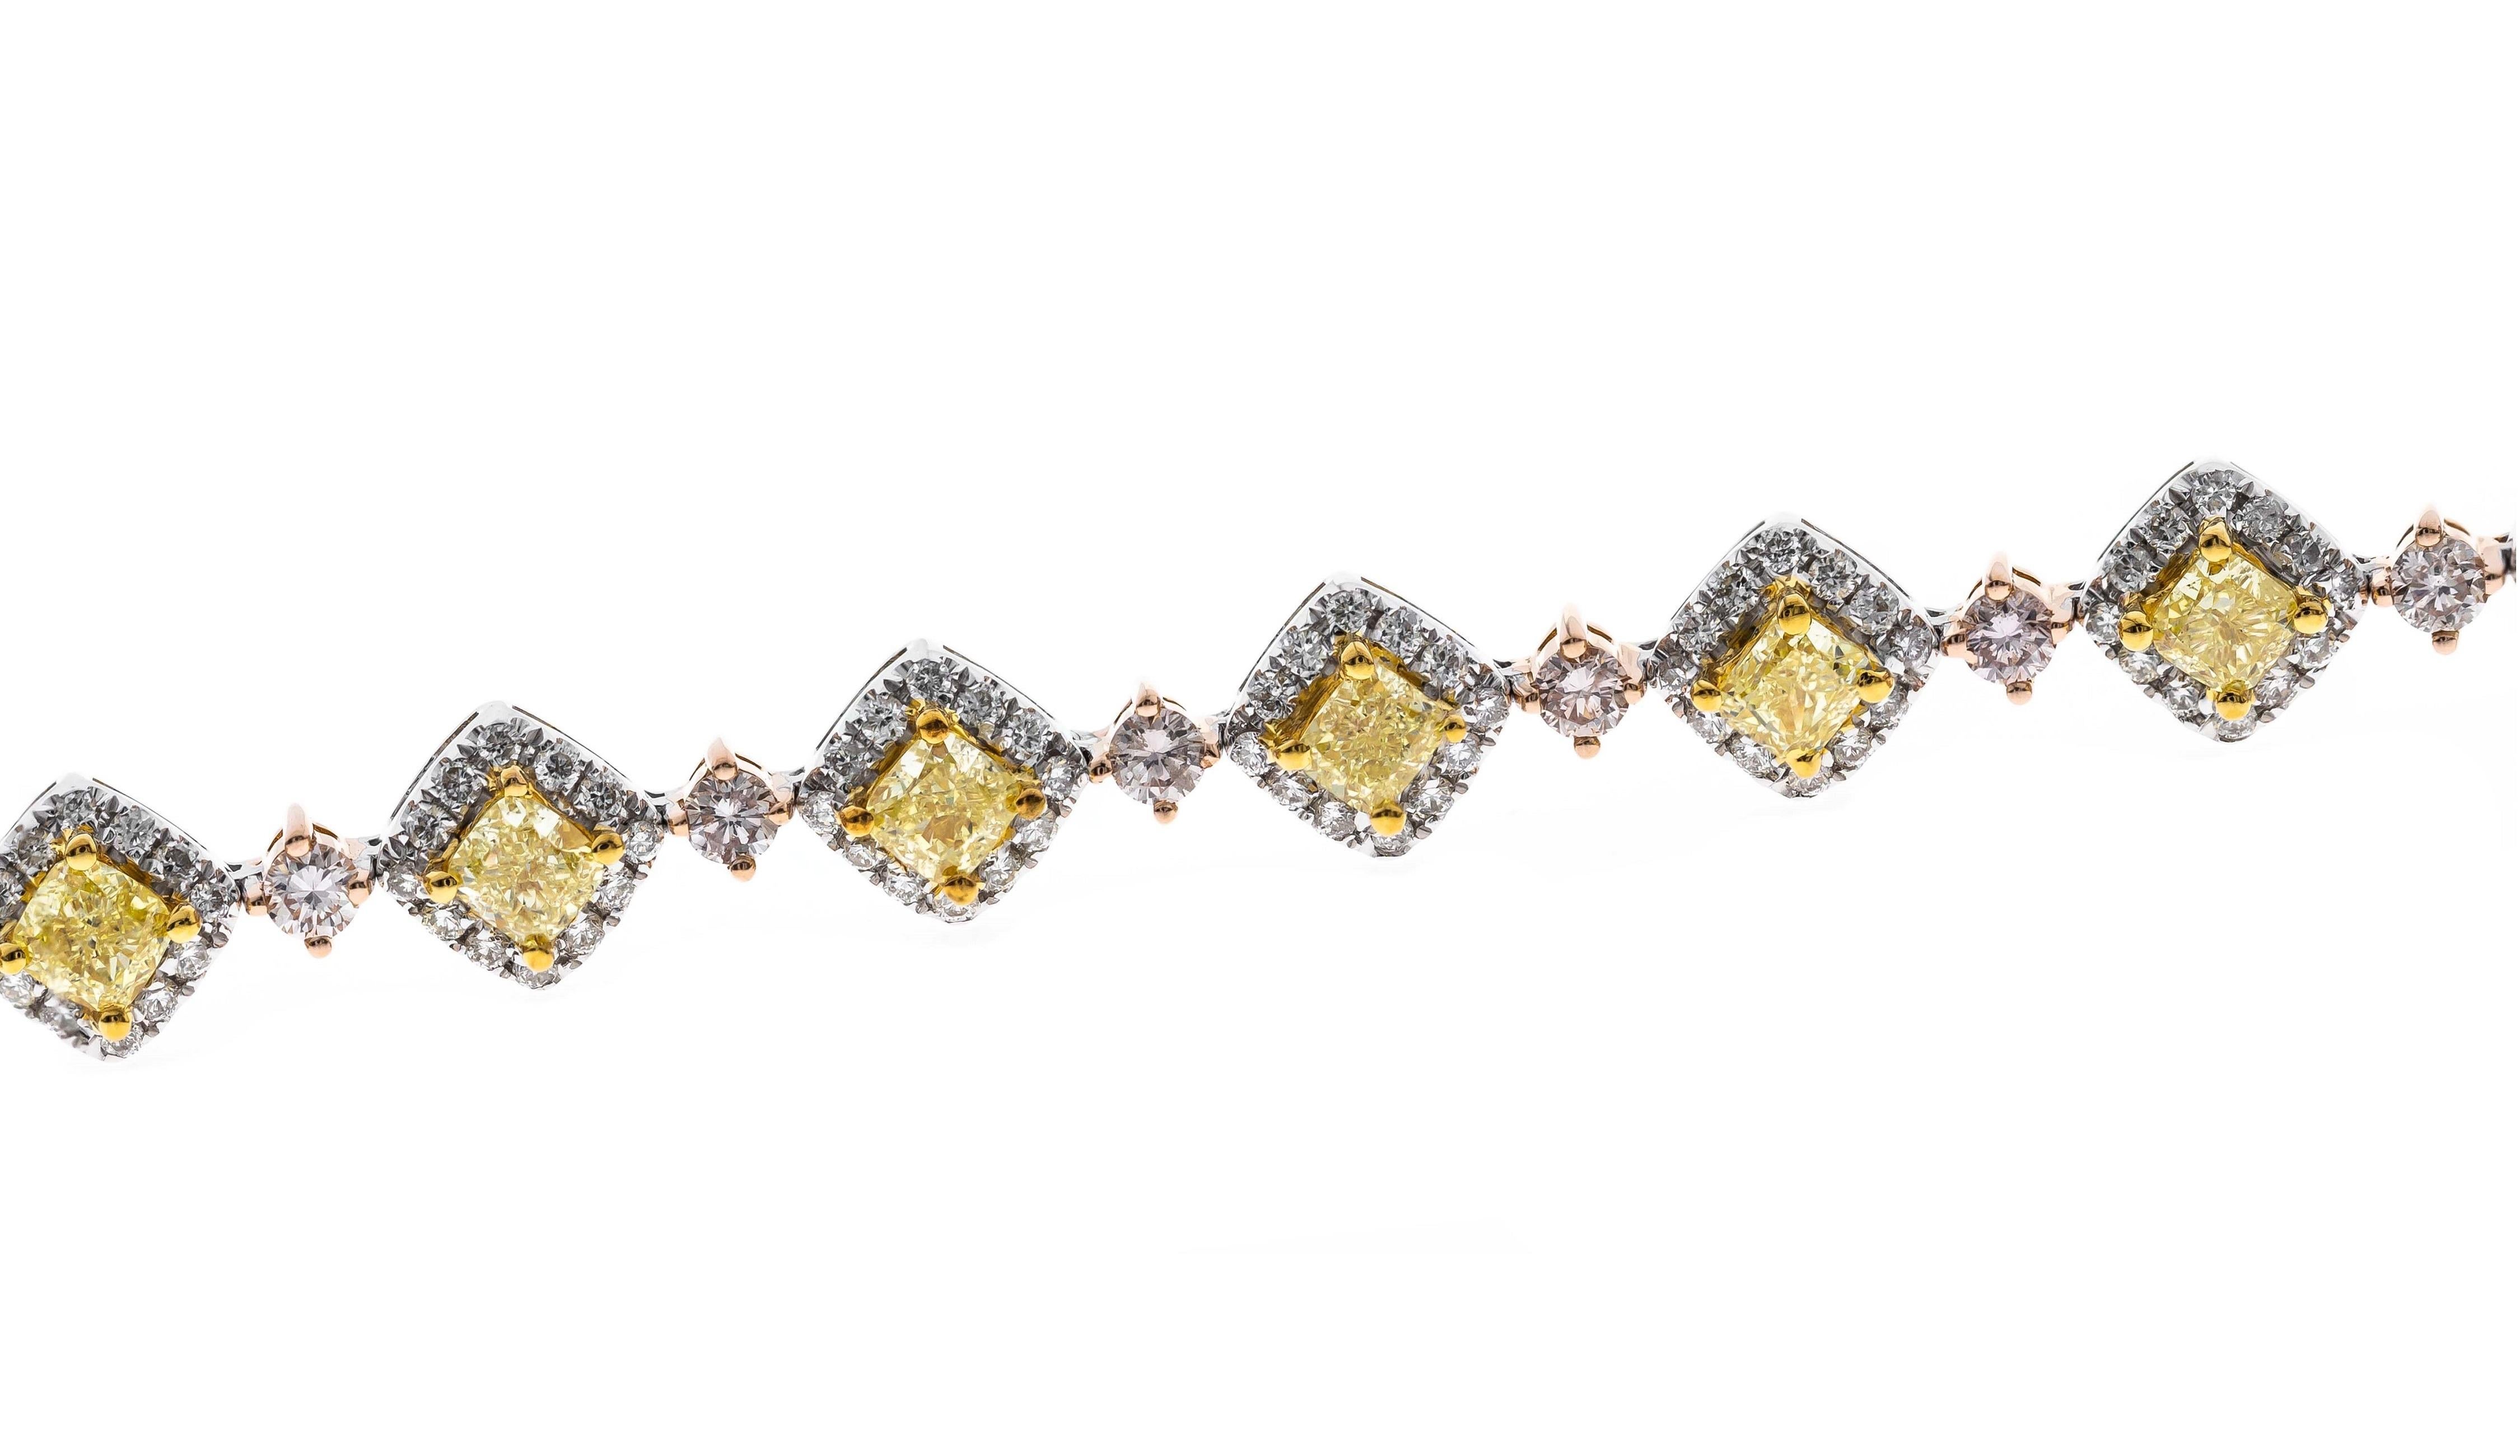 This one of a kind diamond bracelet is crafted in 18-karat Three Tone Gold and features below diamonds.
18 Fancy cushion cut Yellow Diamonds 2.90 Carat
18 Round Brilliant cut Pink Diamonds 0.95 Carat 
216 Round Brilliant cut Diamond 1.34 Carat
This